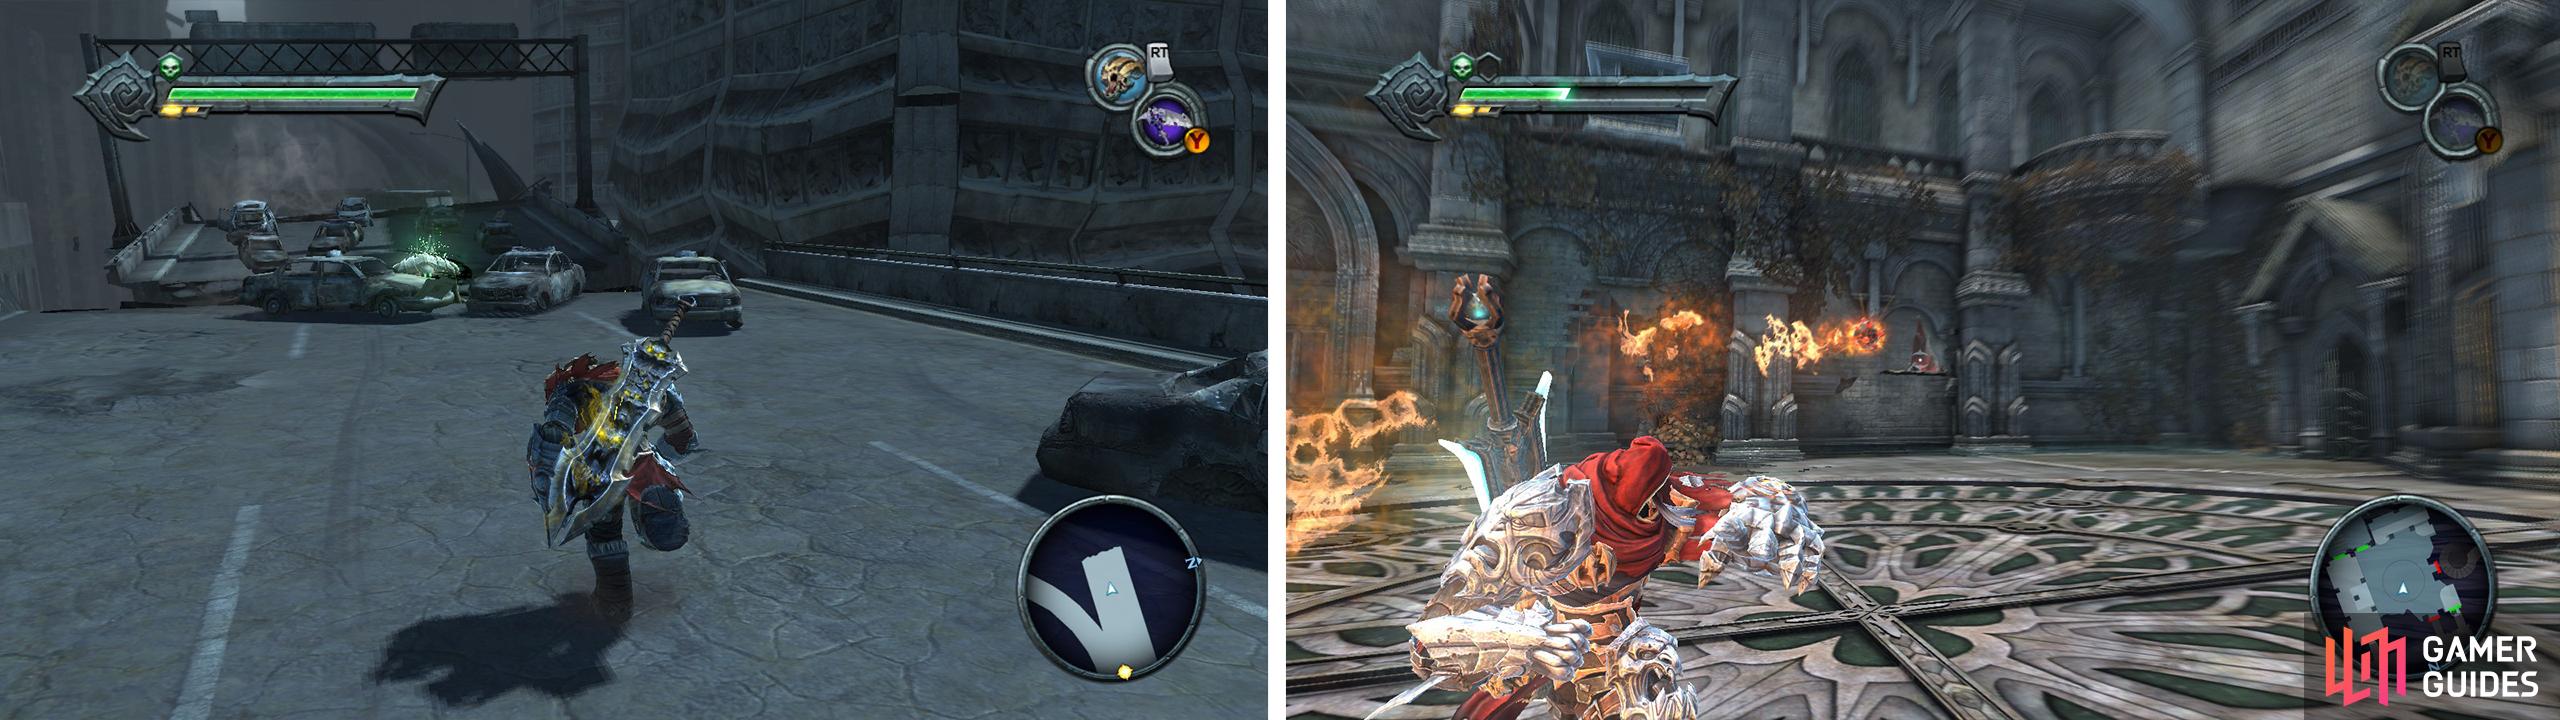 Broken Stair: When you reach the overpass, grab the Life Stone Shard from the dead end to the left (left). Twilight Cathedral: In this courtyard throw a bomb through the window (right) to reveal a Life Stone Shard (right).